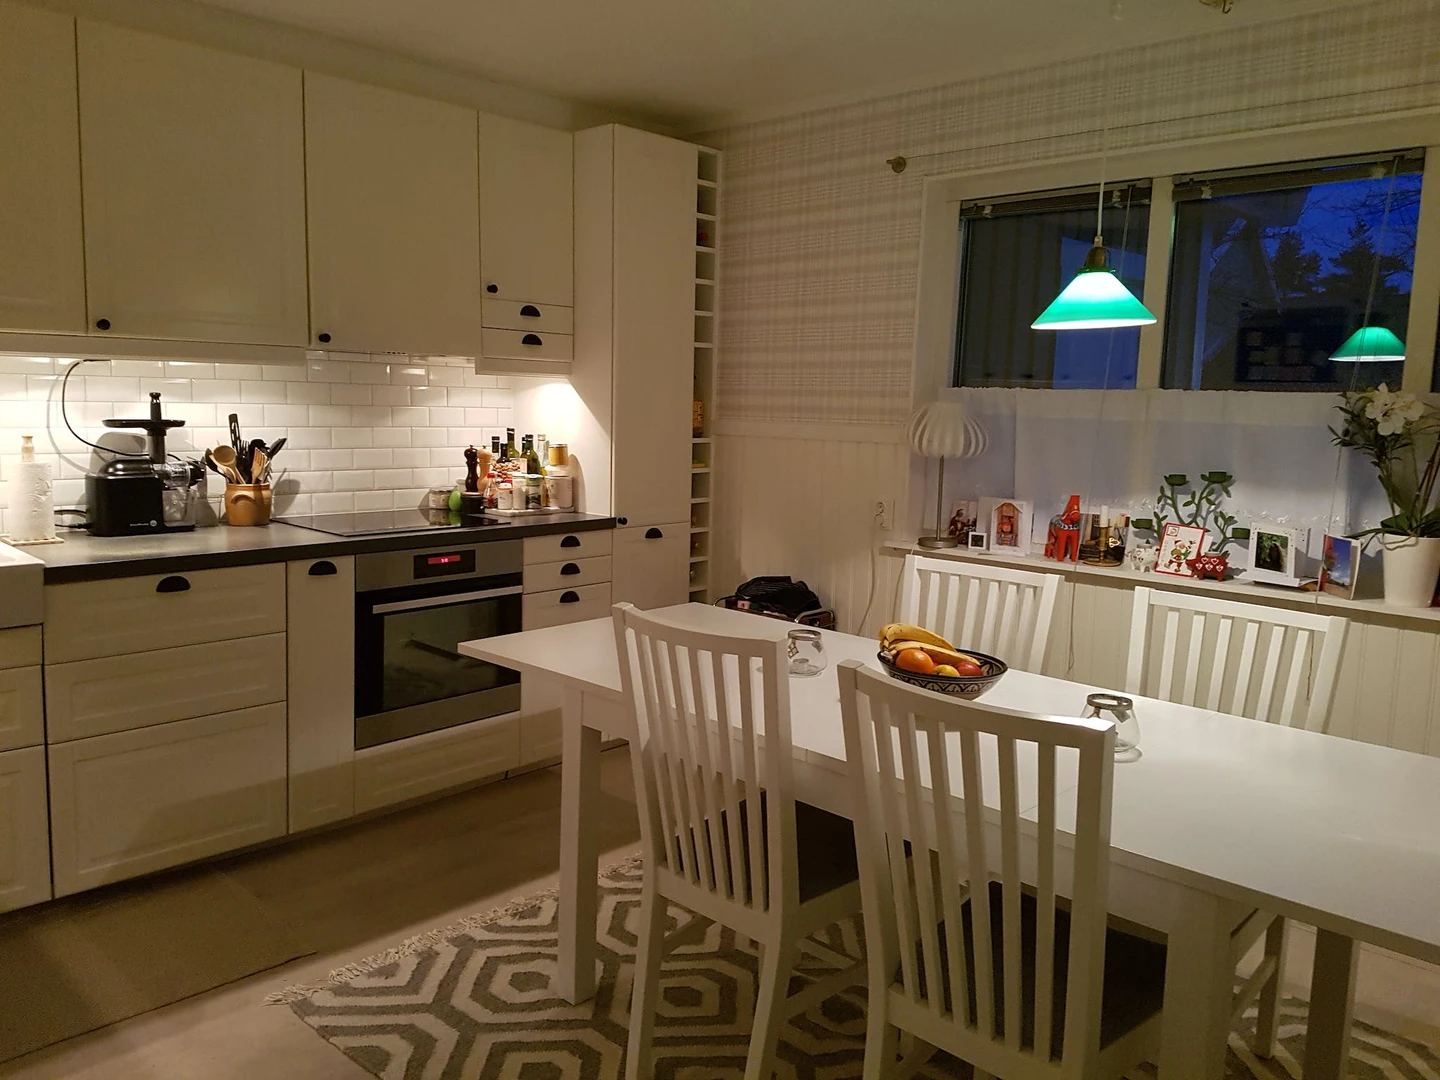 Renting rooms by the month in Stockholm